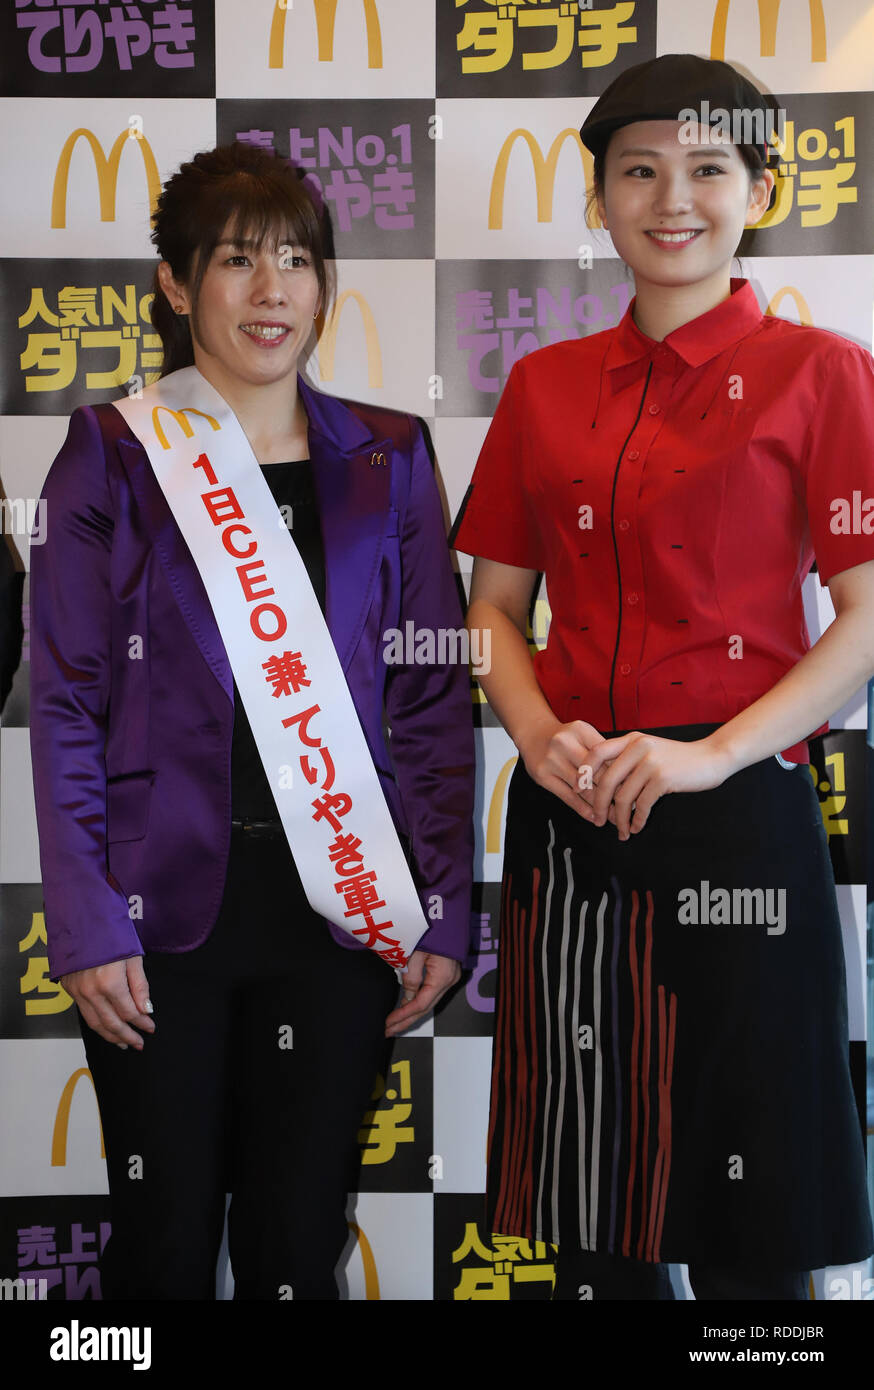 January 18, 2019, Tokyo, Japan - Three times Olympic wrestling gold medalist Saori Yoshida (L) smiles with an employee of McDonald's as she acts as CEO-for-a-day of McDonald's restaurant chain at a McDonald's restaurant in Tokyo on Friday, January 18, 2019. Yoshida attended her first comercial event after she announced reirement from wrestling career last week.   (Photo by Yoshio Tsunoda/AFLO) Stock Photo